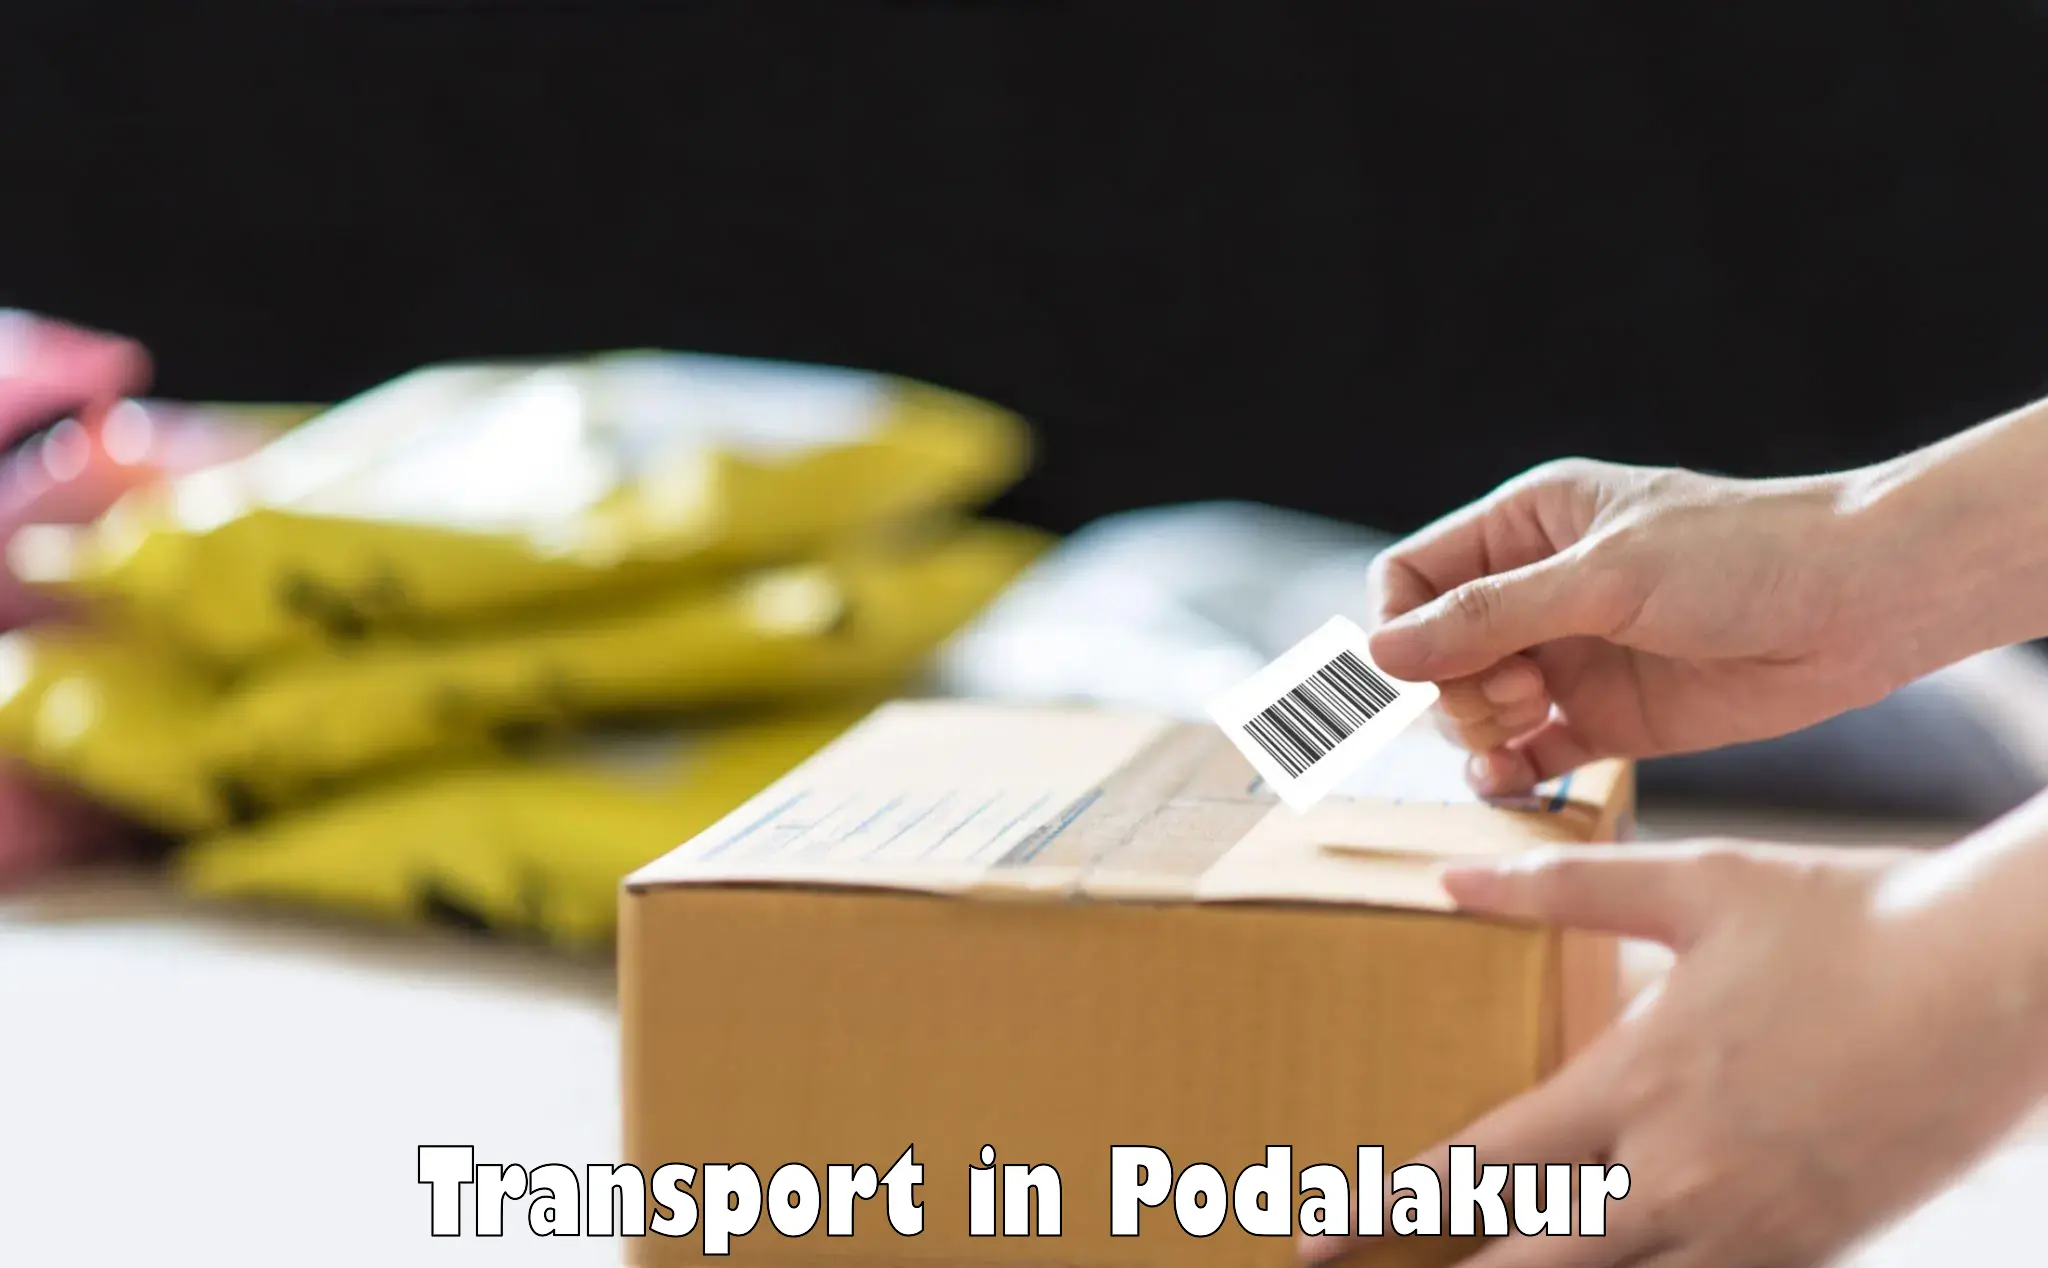 Air cargo transport services in Podalakur